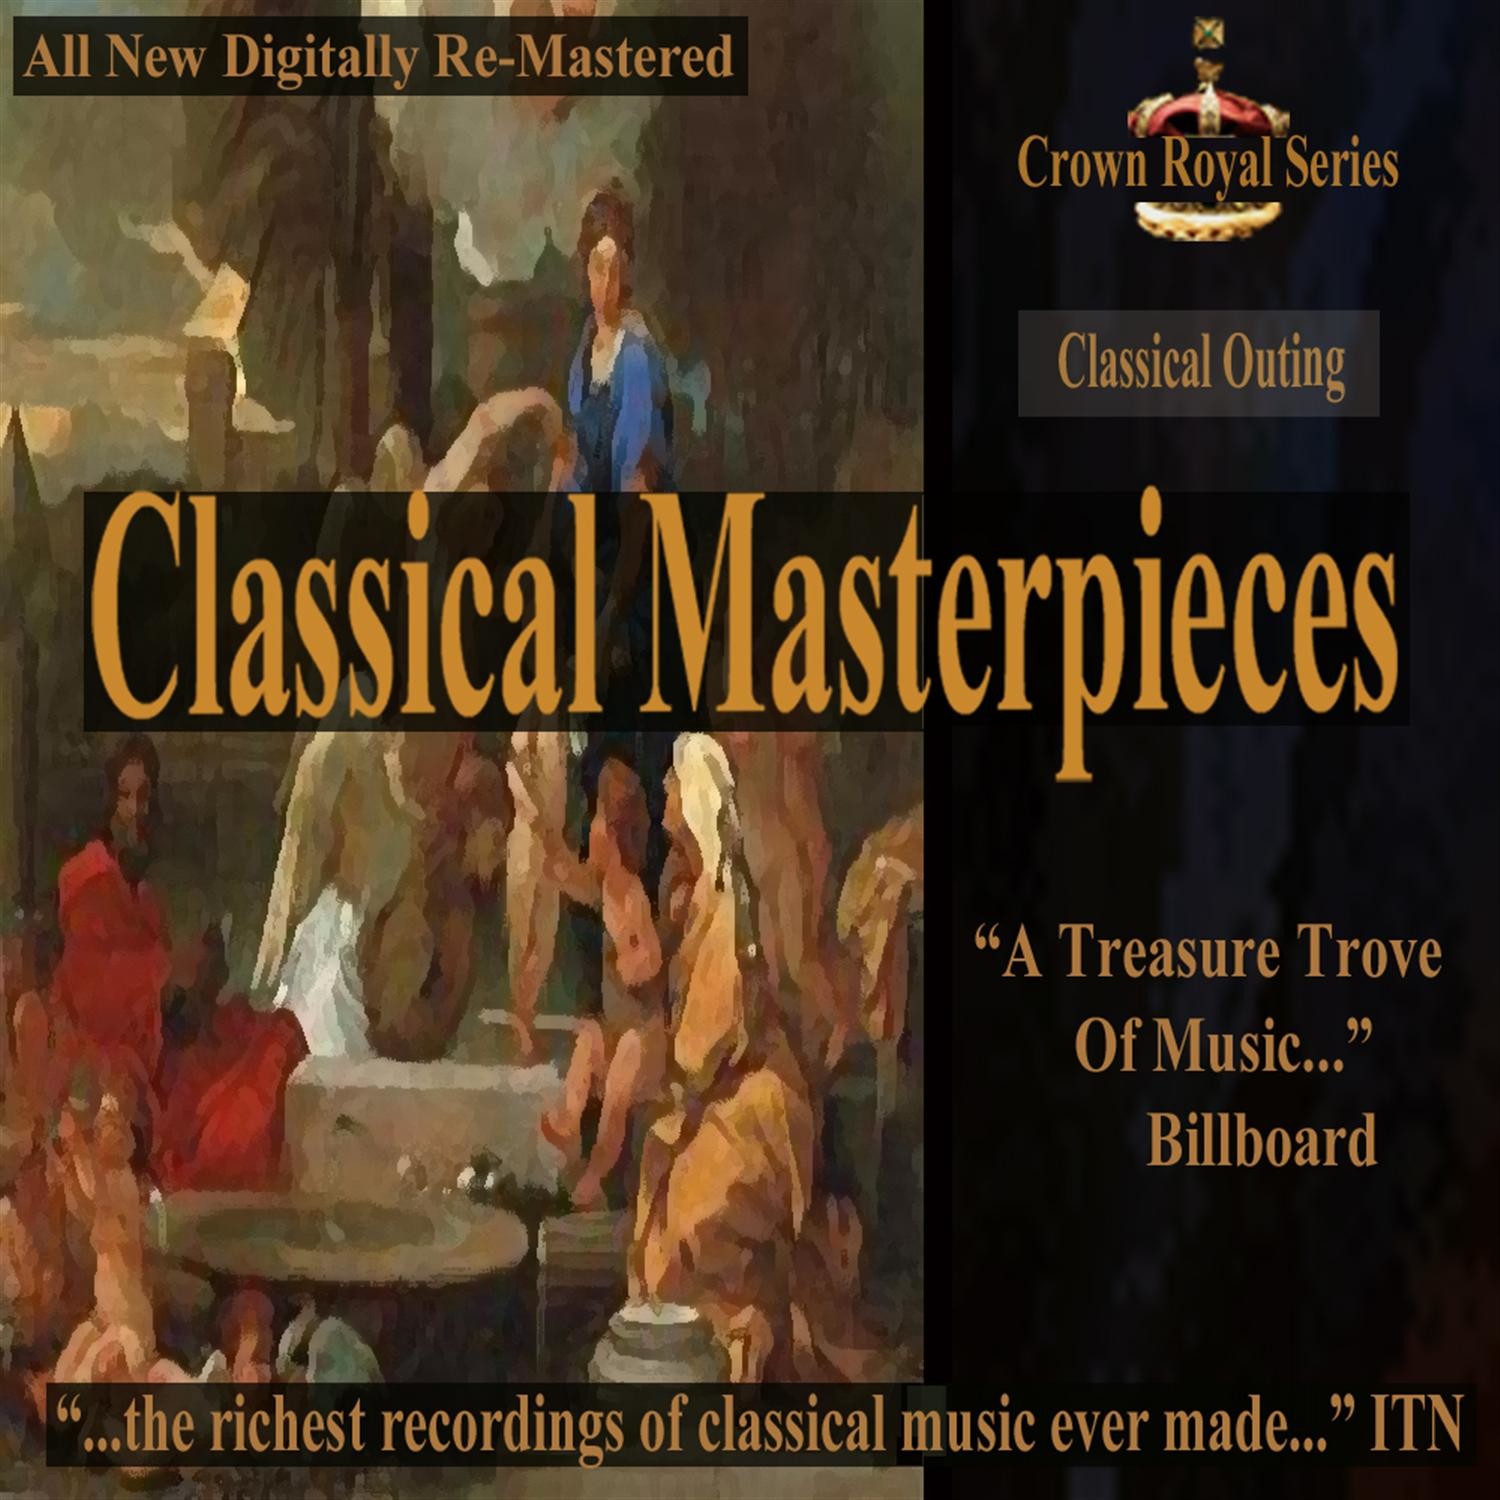 Classical Outing - Classical Masterpieces